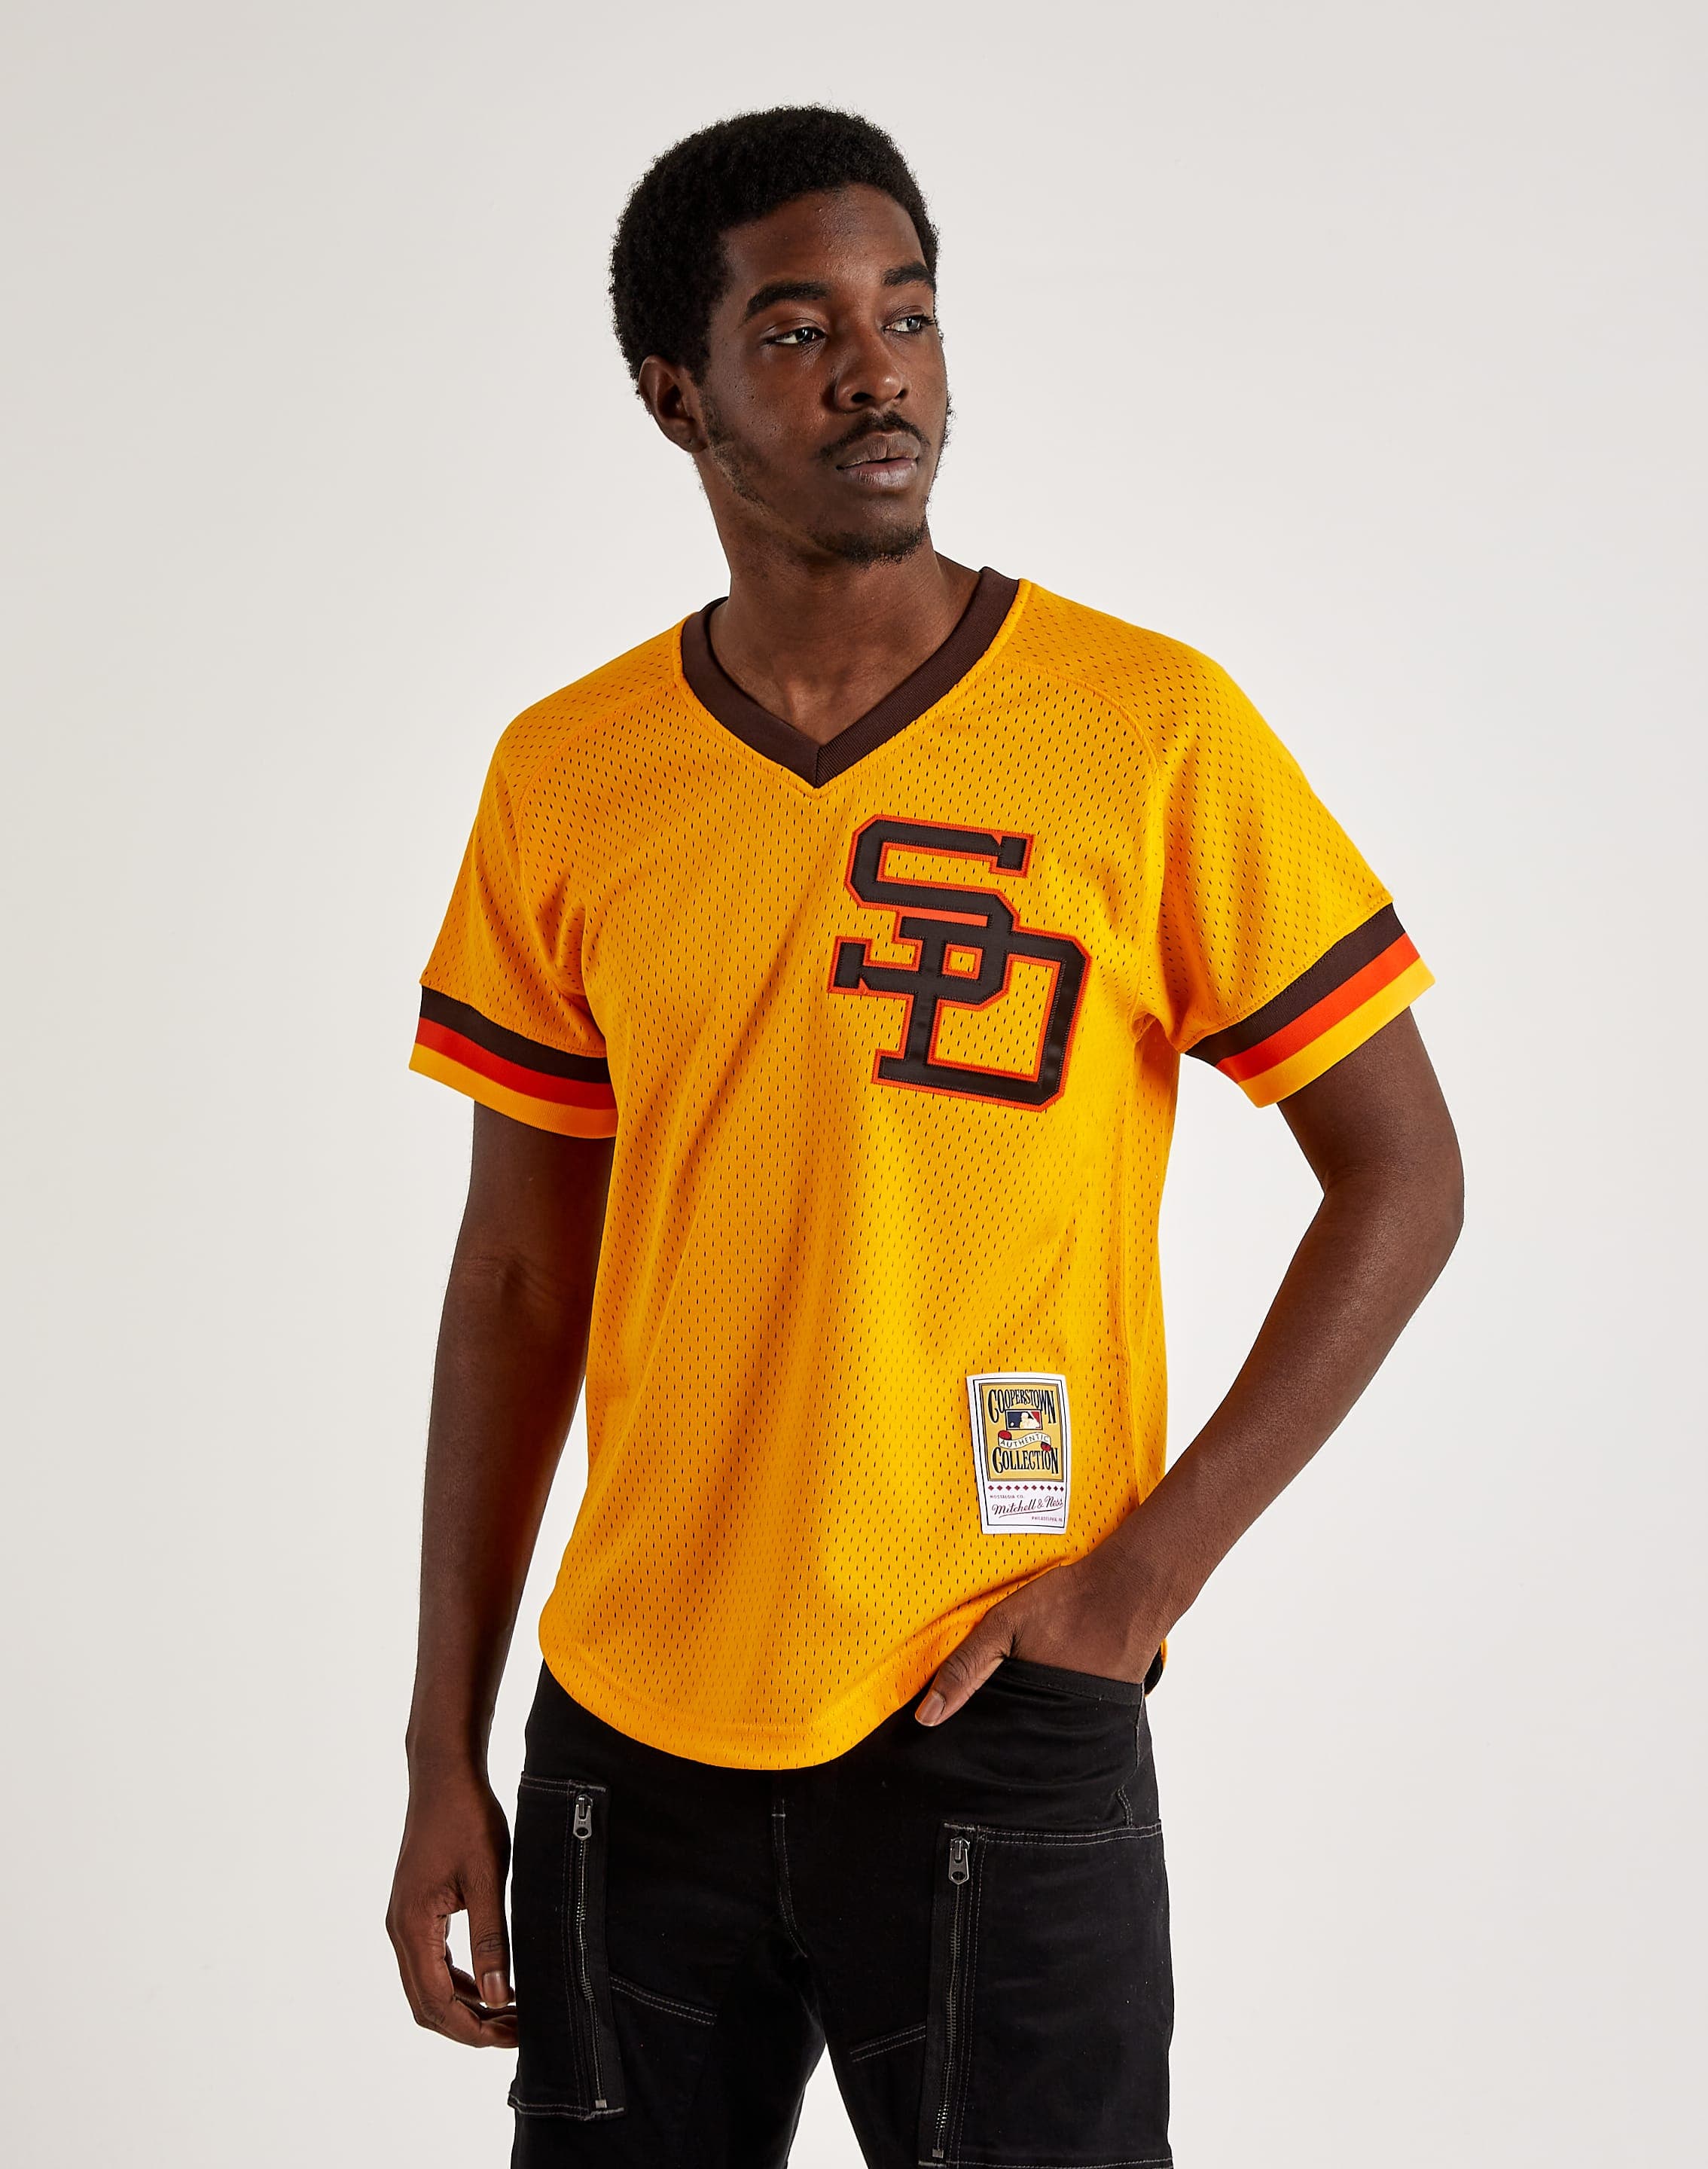 San Diego Padres Jerseys Throwback - Padres Store